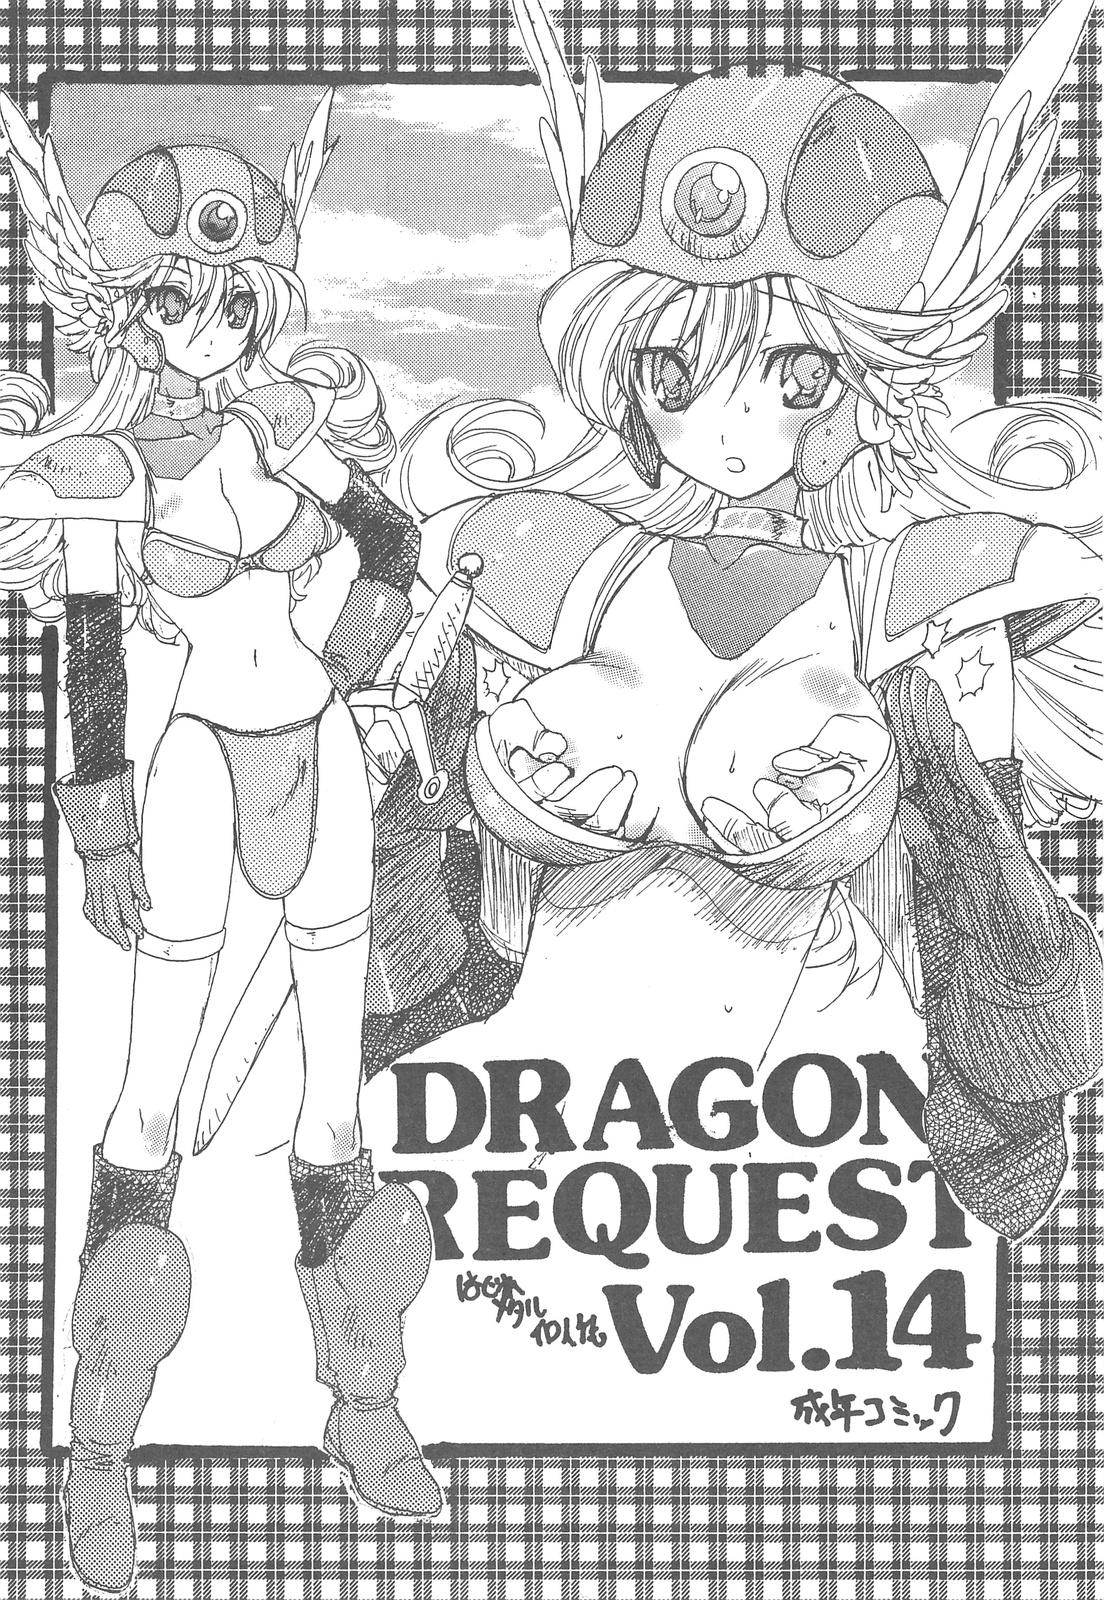 Lesbos DRAGON REQUEST Vol.14 - Dragon quest iii Tanned - Page 2